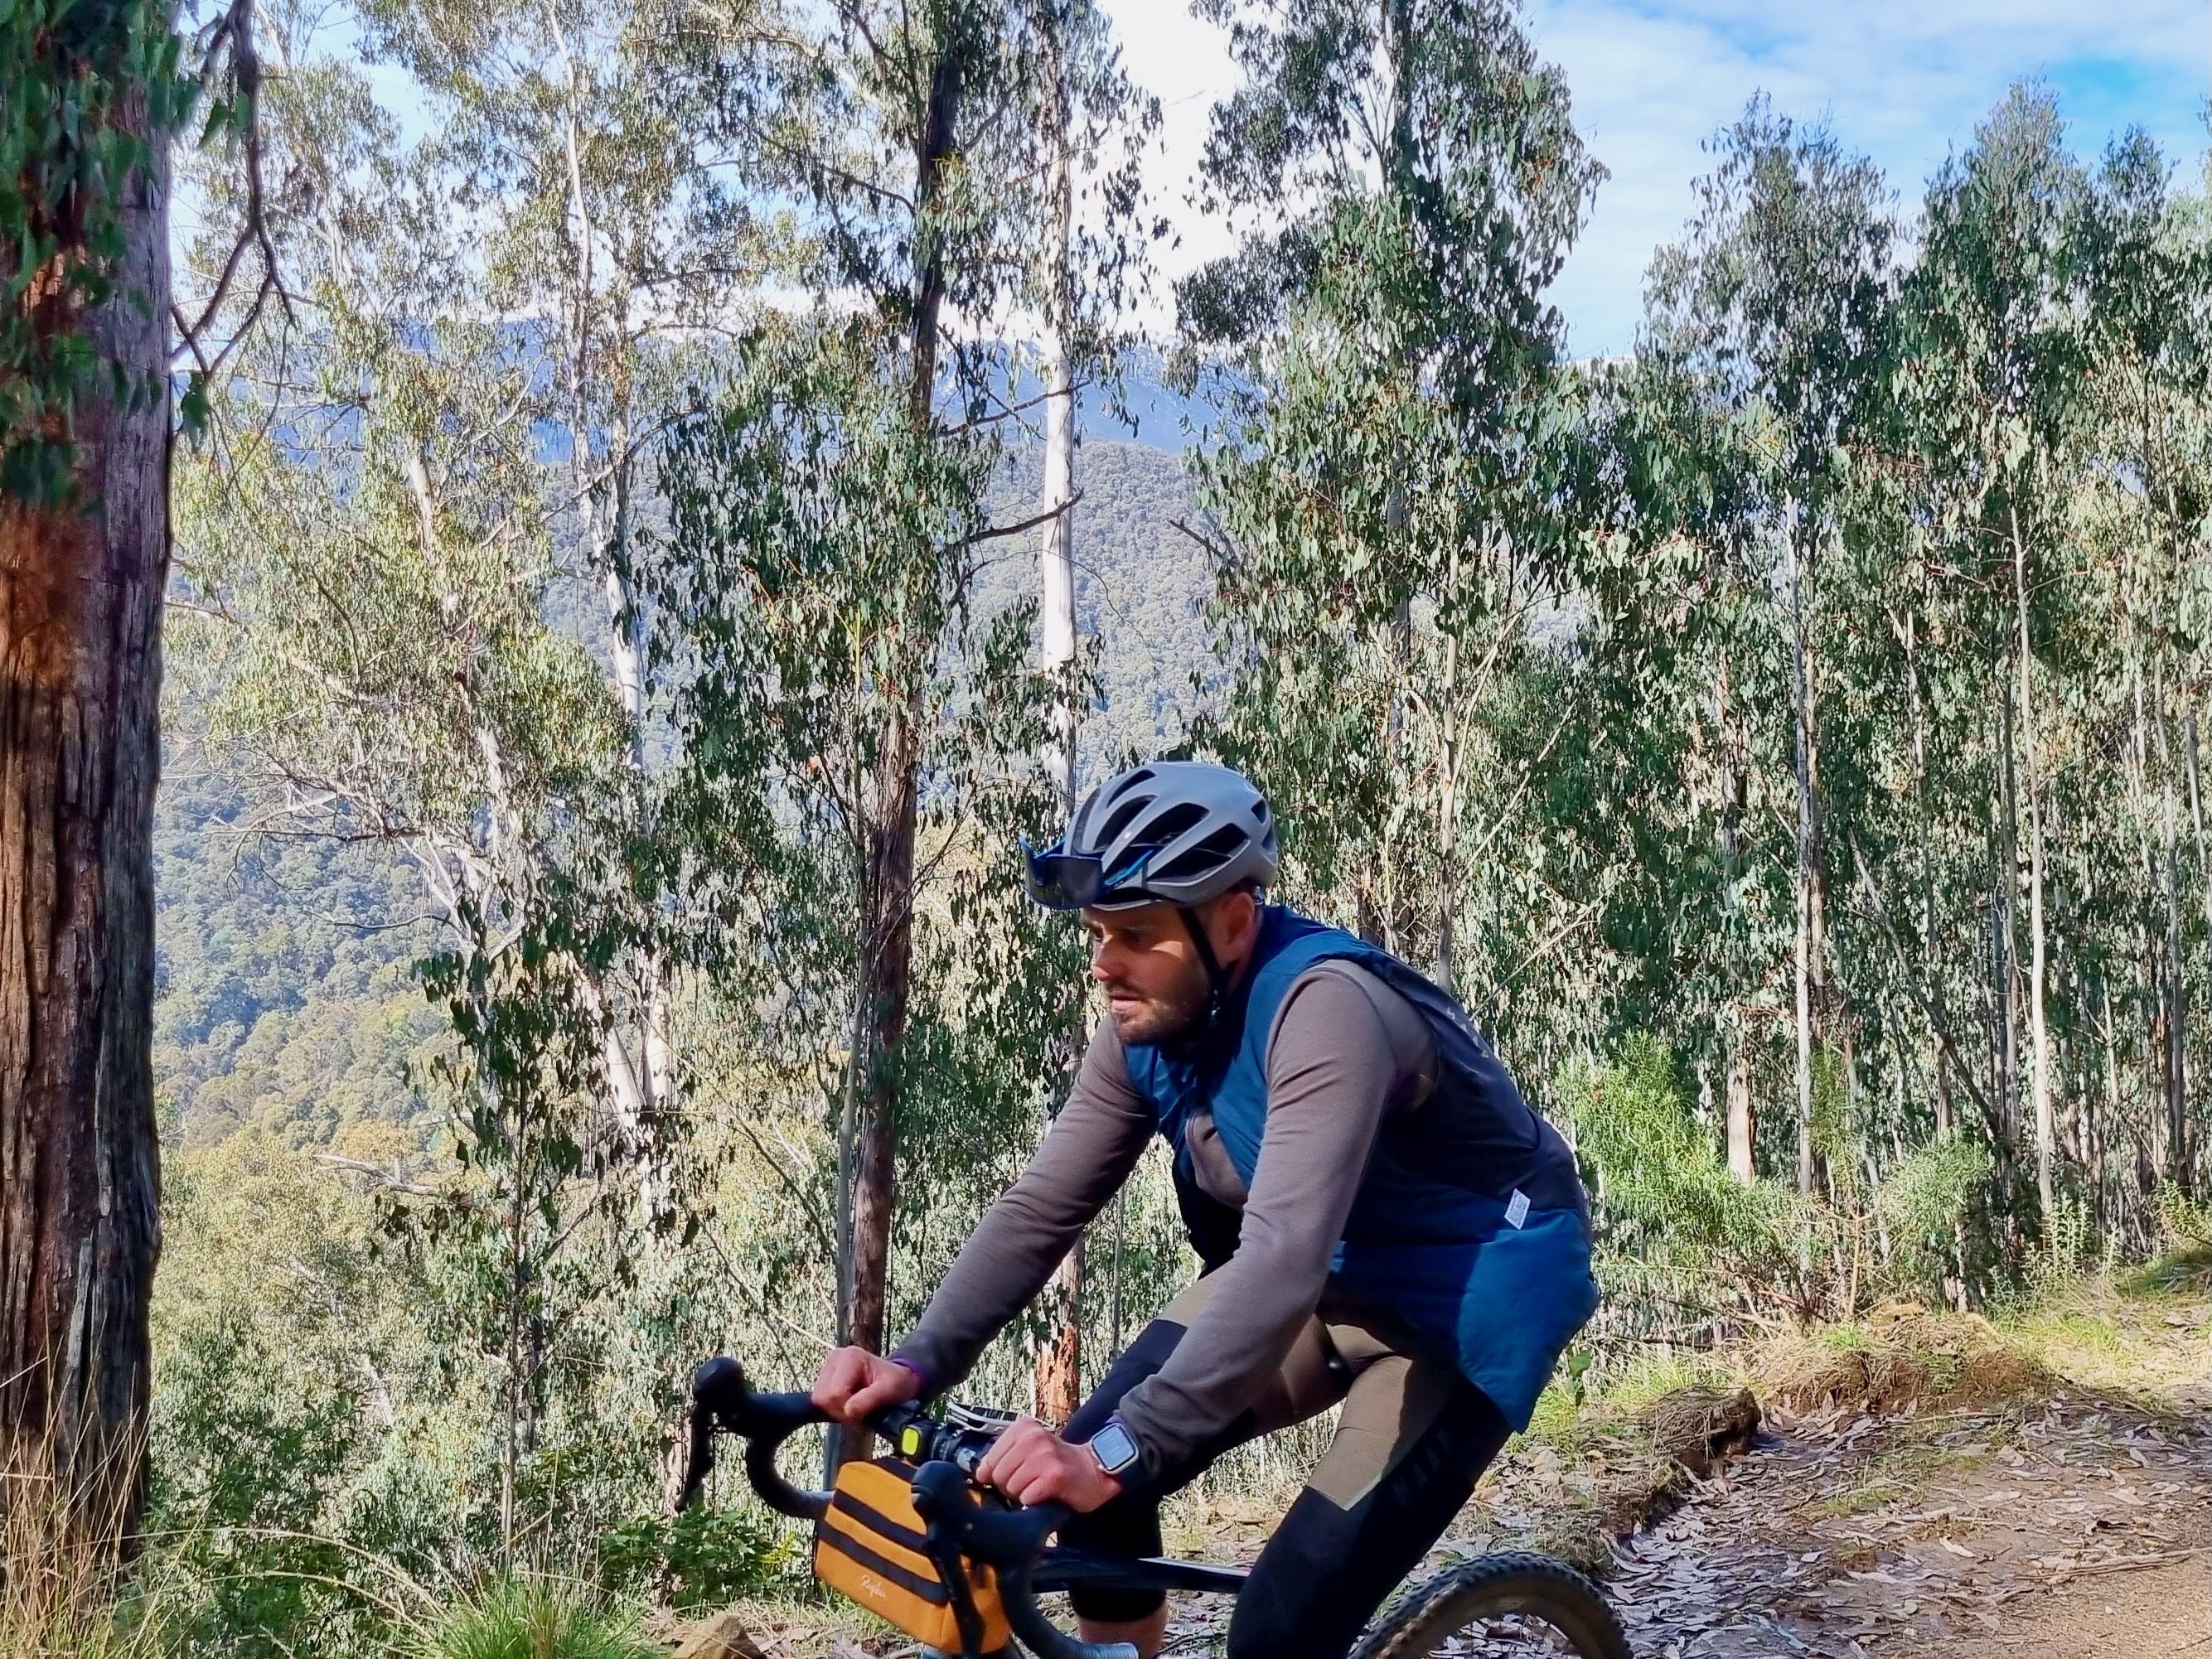 Cyclist gravel riding through native bushland with mountains in the background